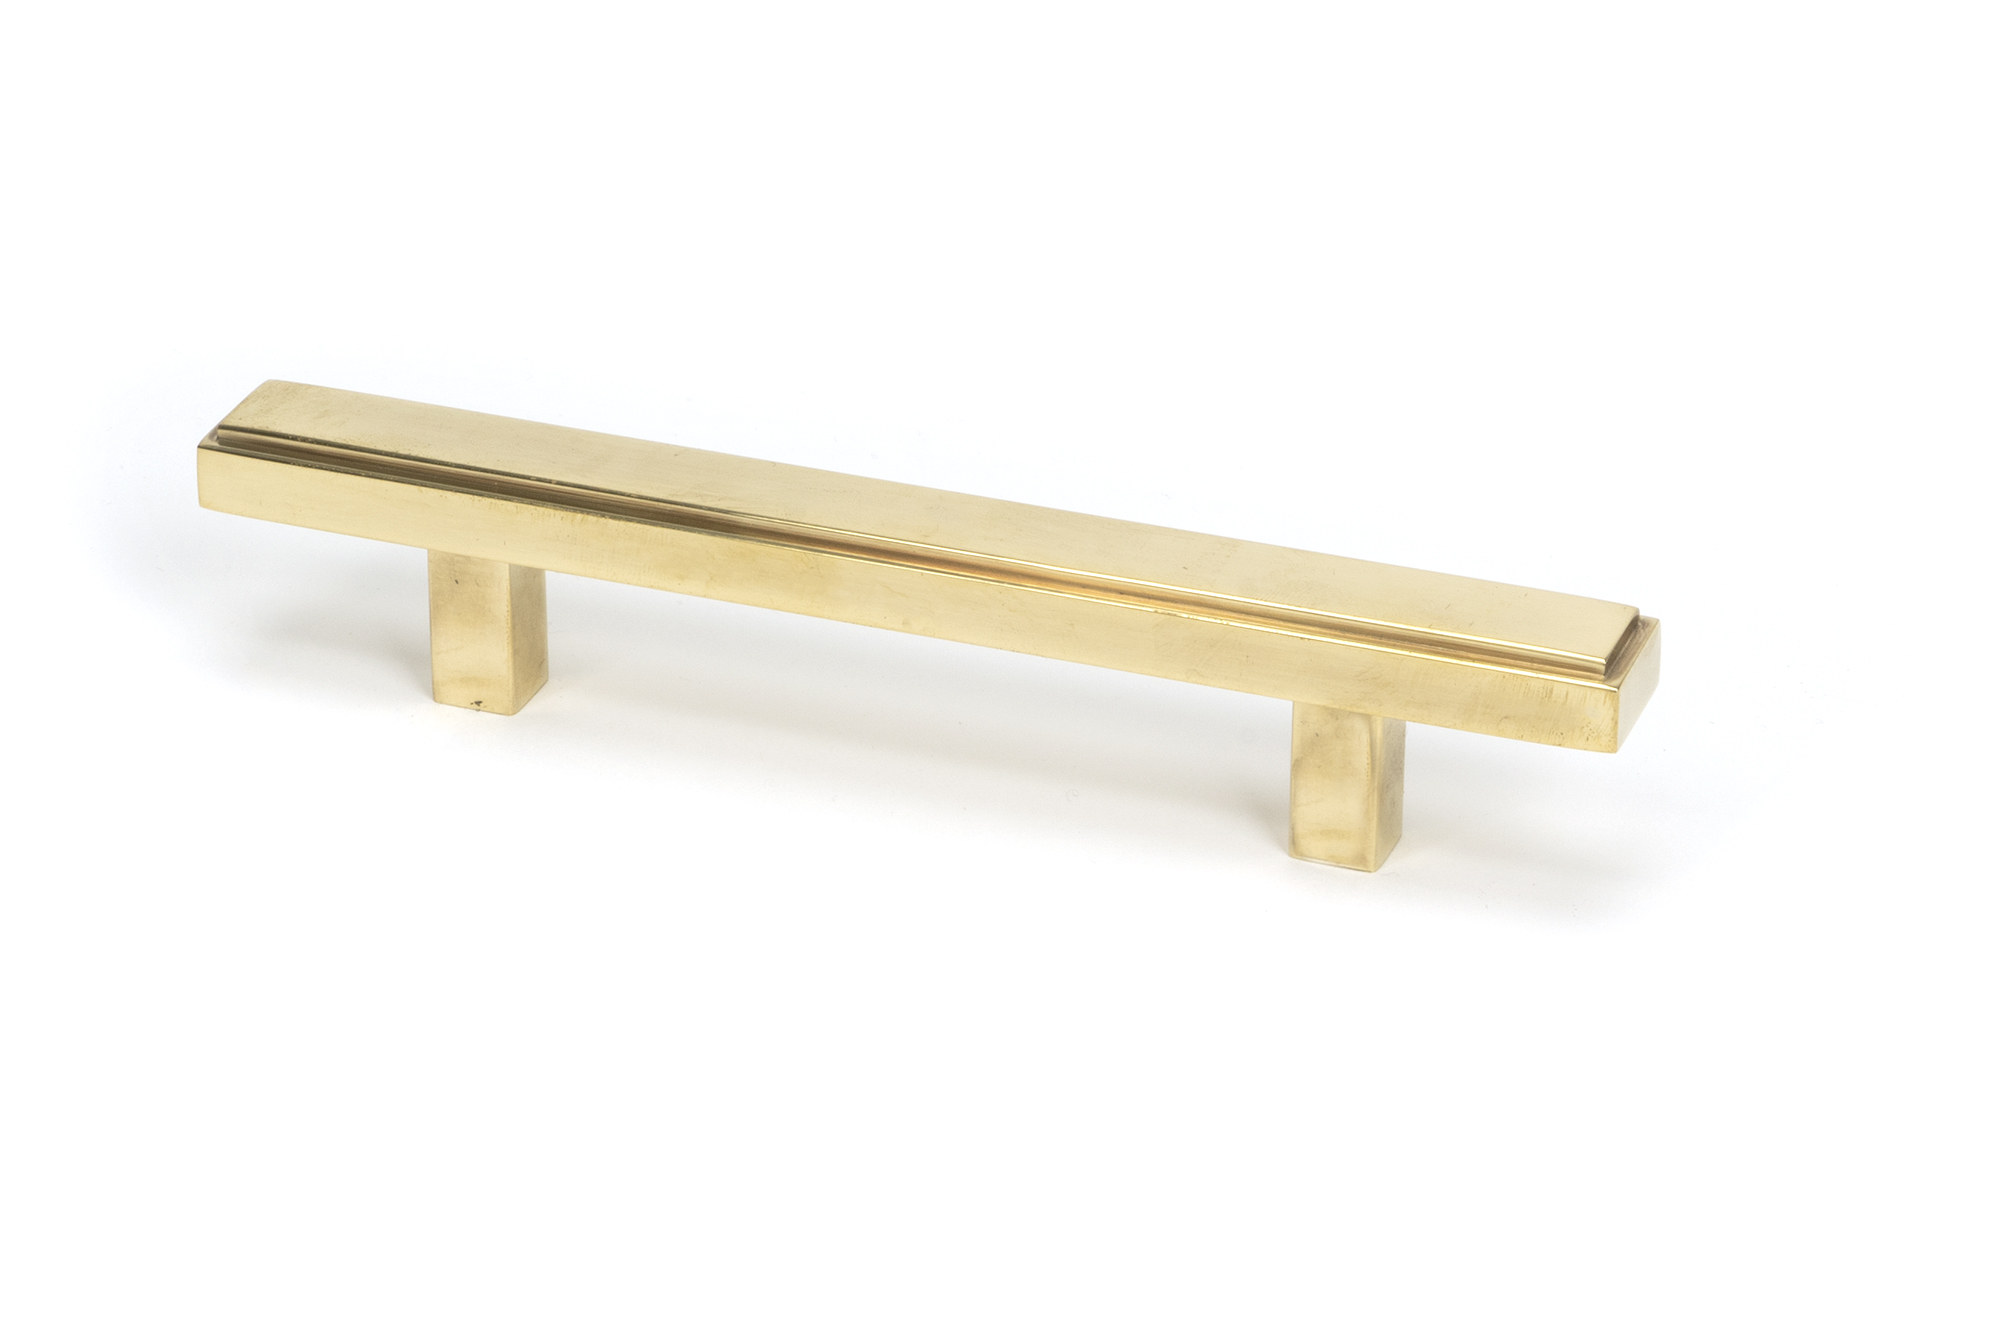 Aged Brass Scully Pull Handle - Small